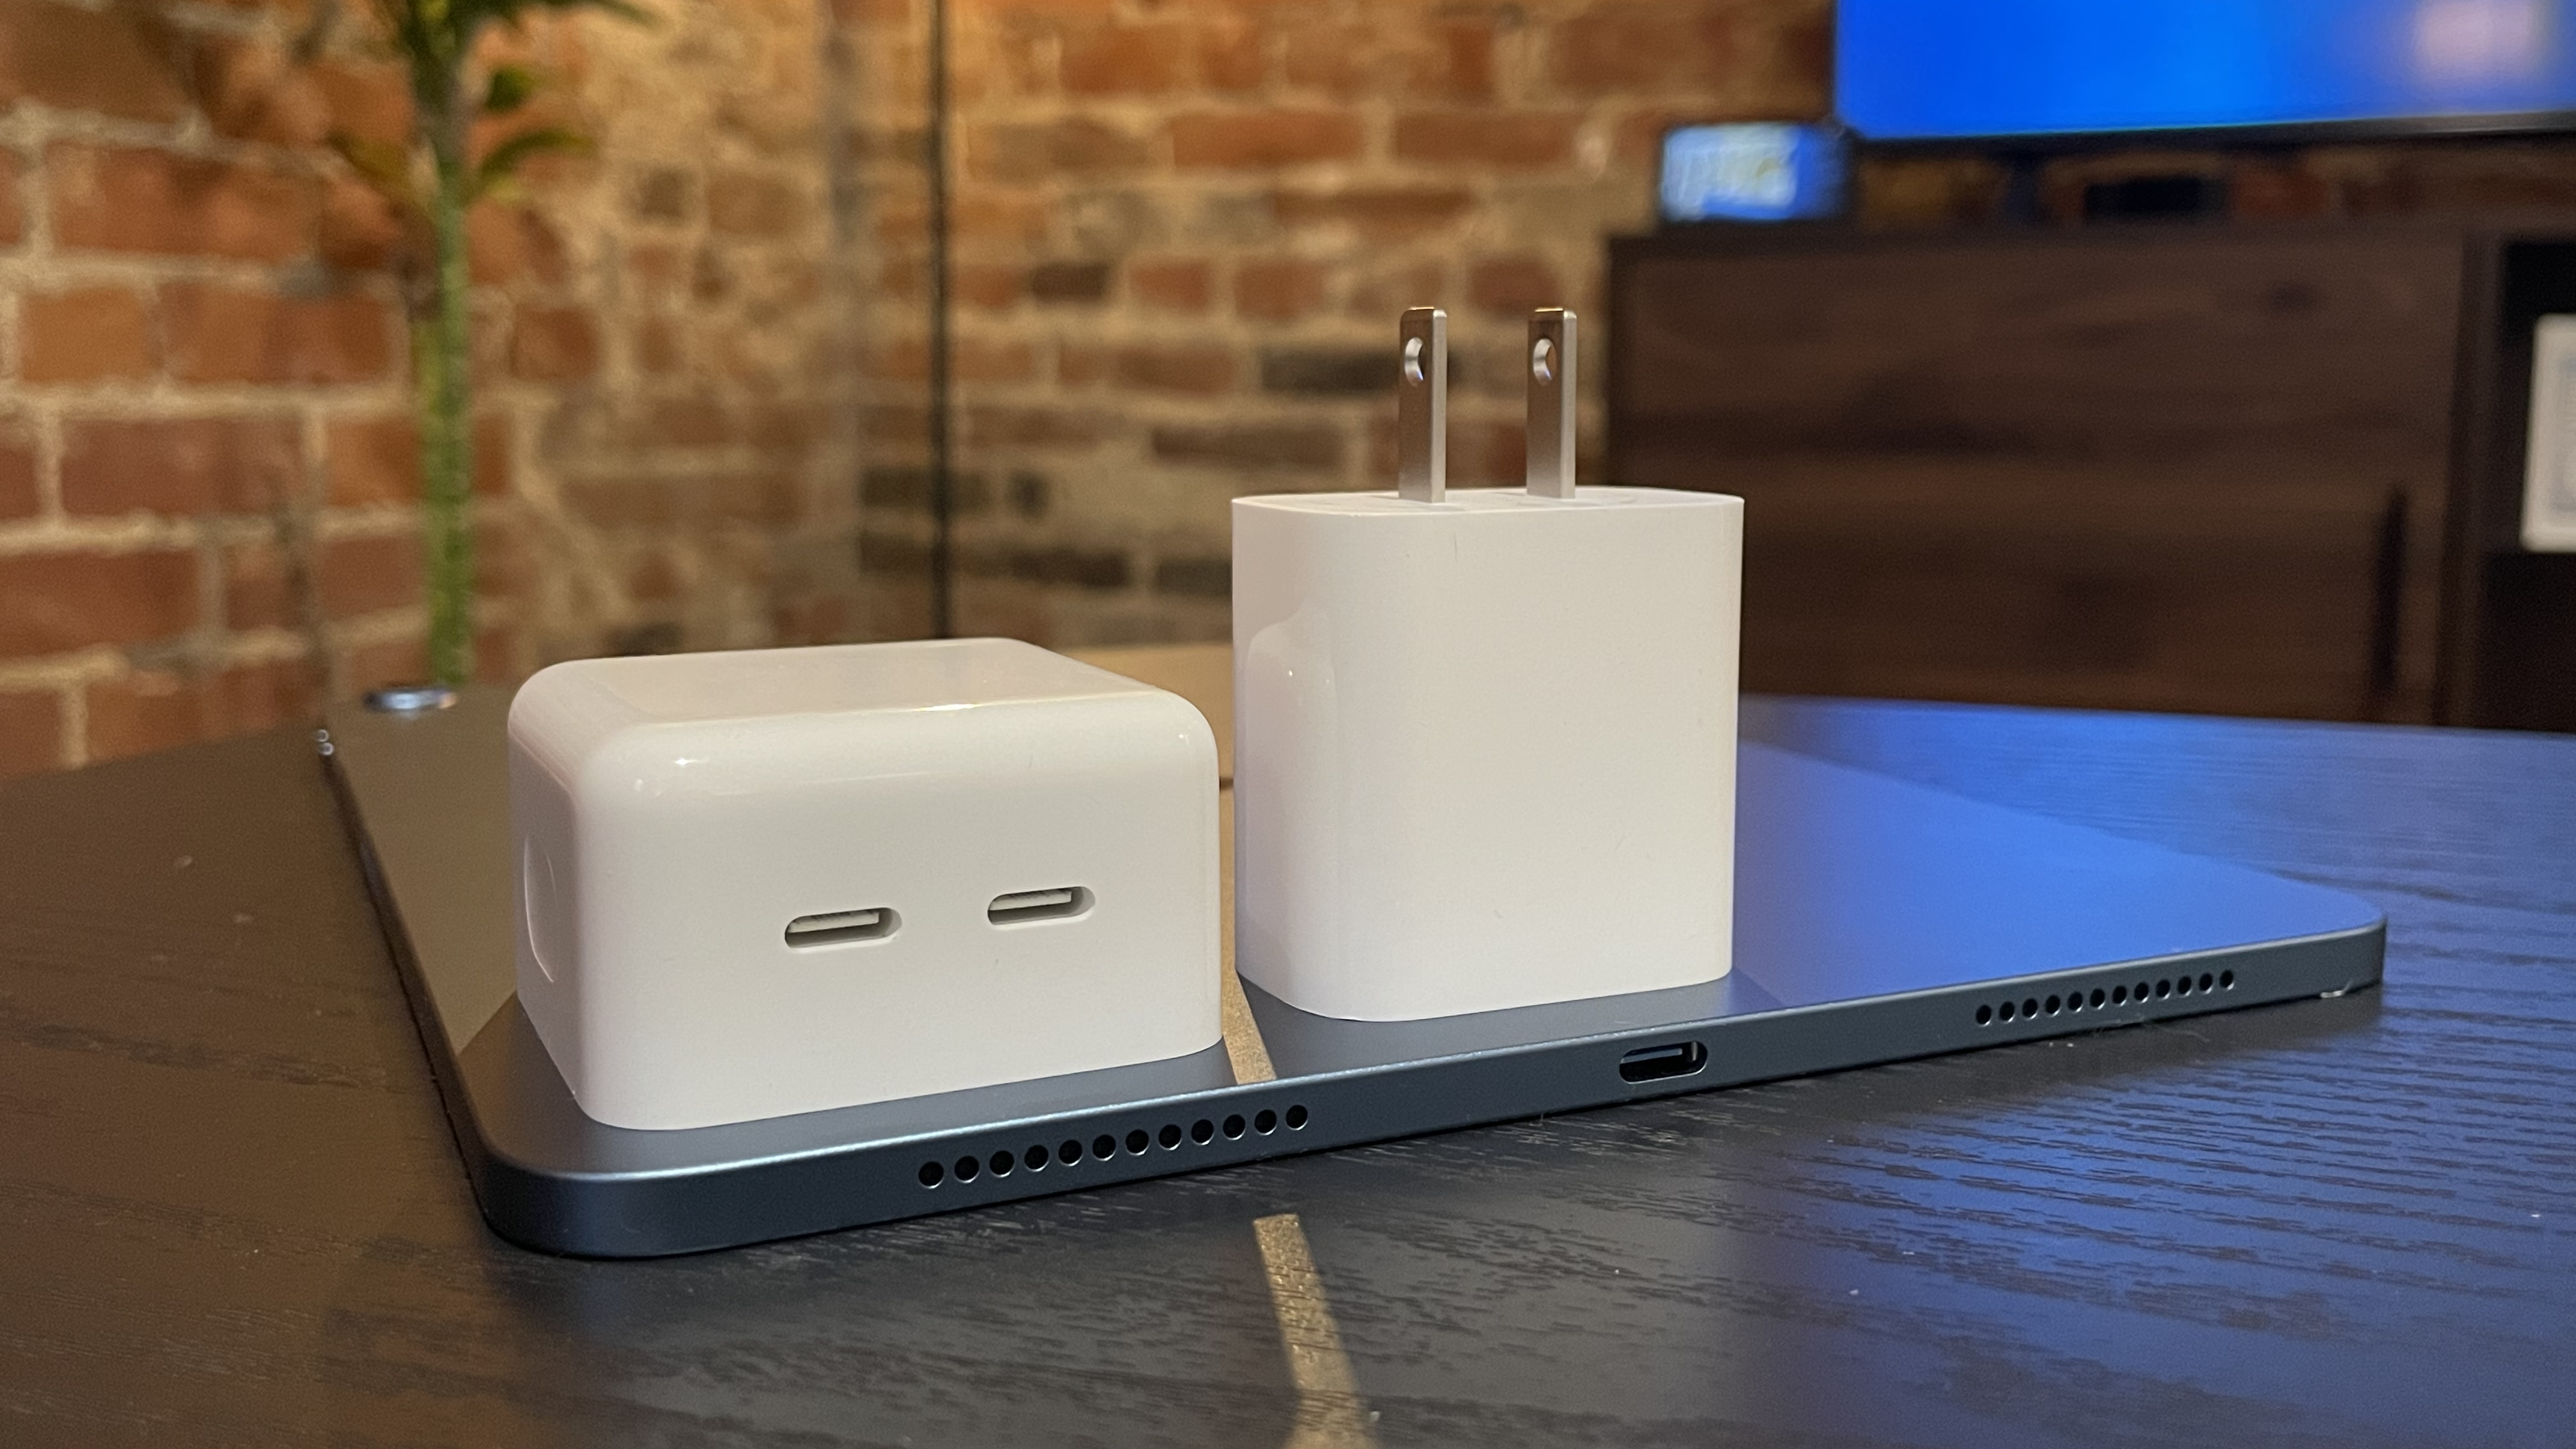 Hands-on: 90W GaN dual USB-C charger from RAVPower - 9to5Mac